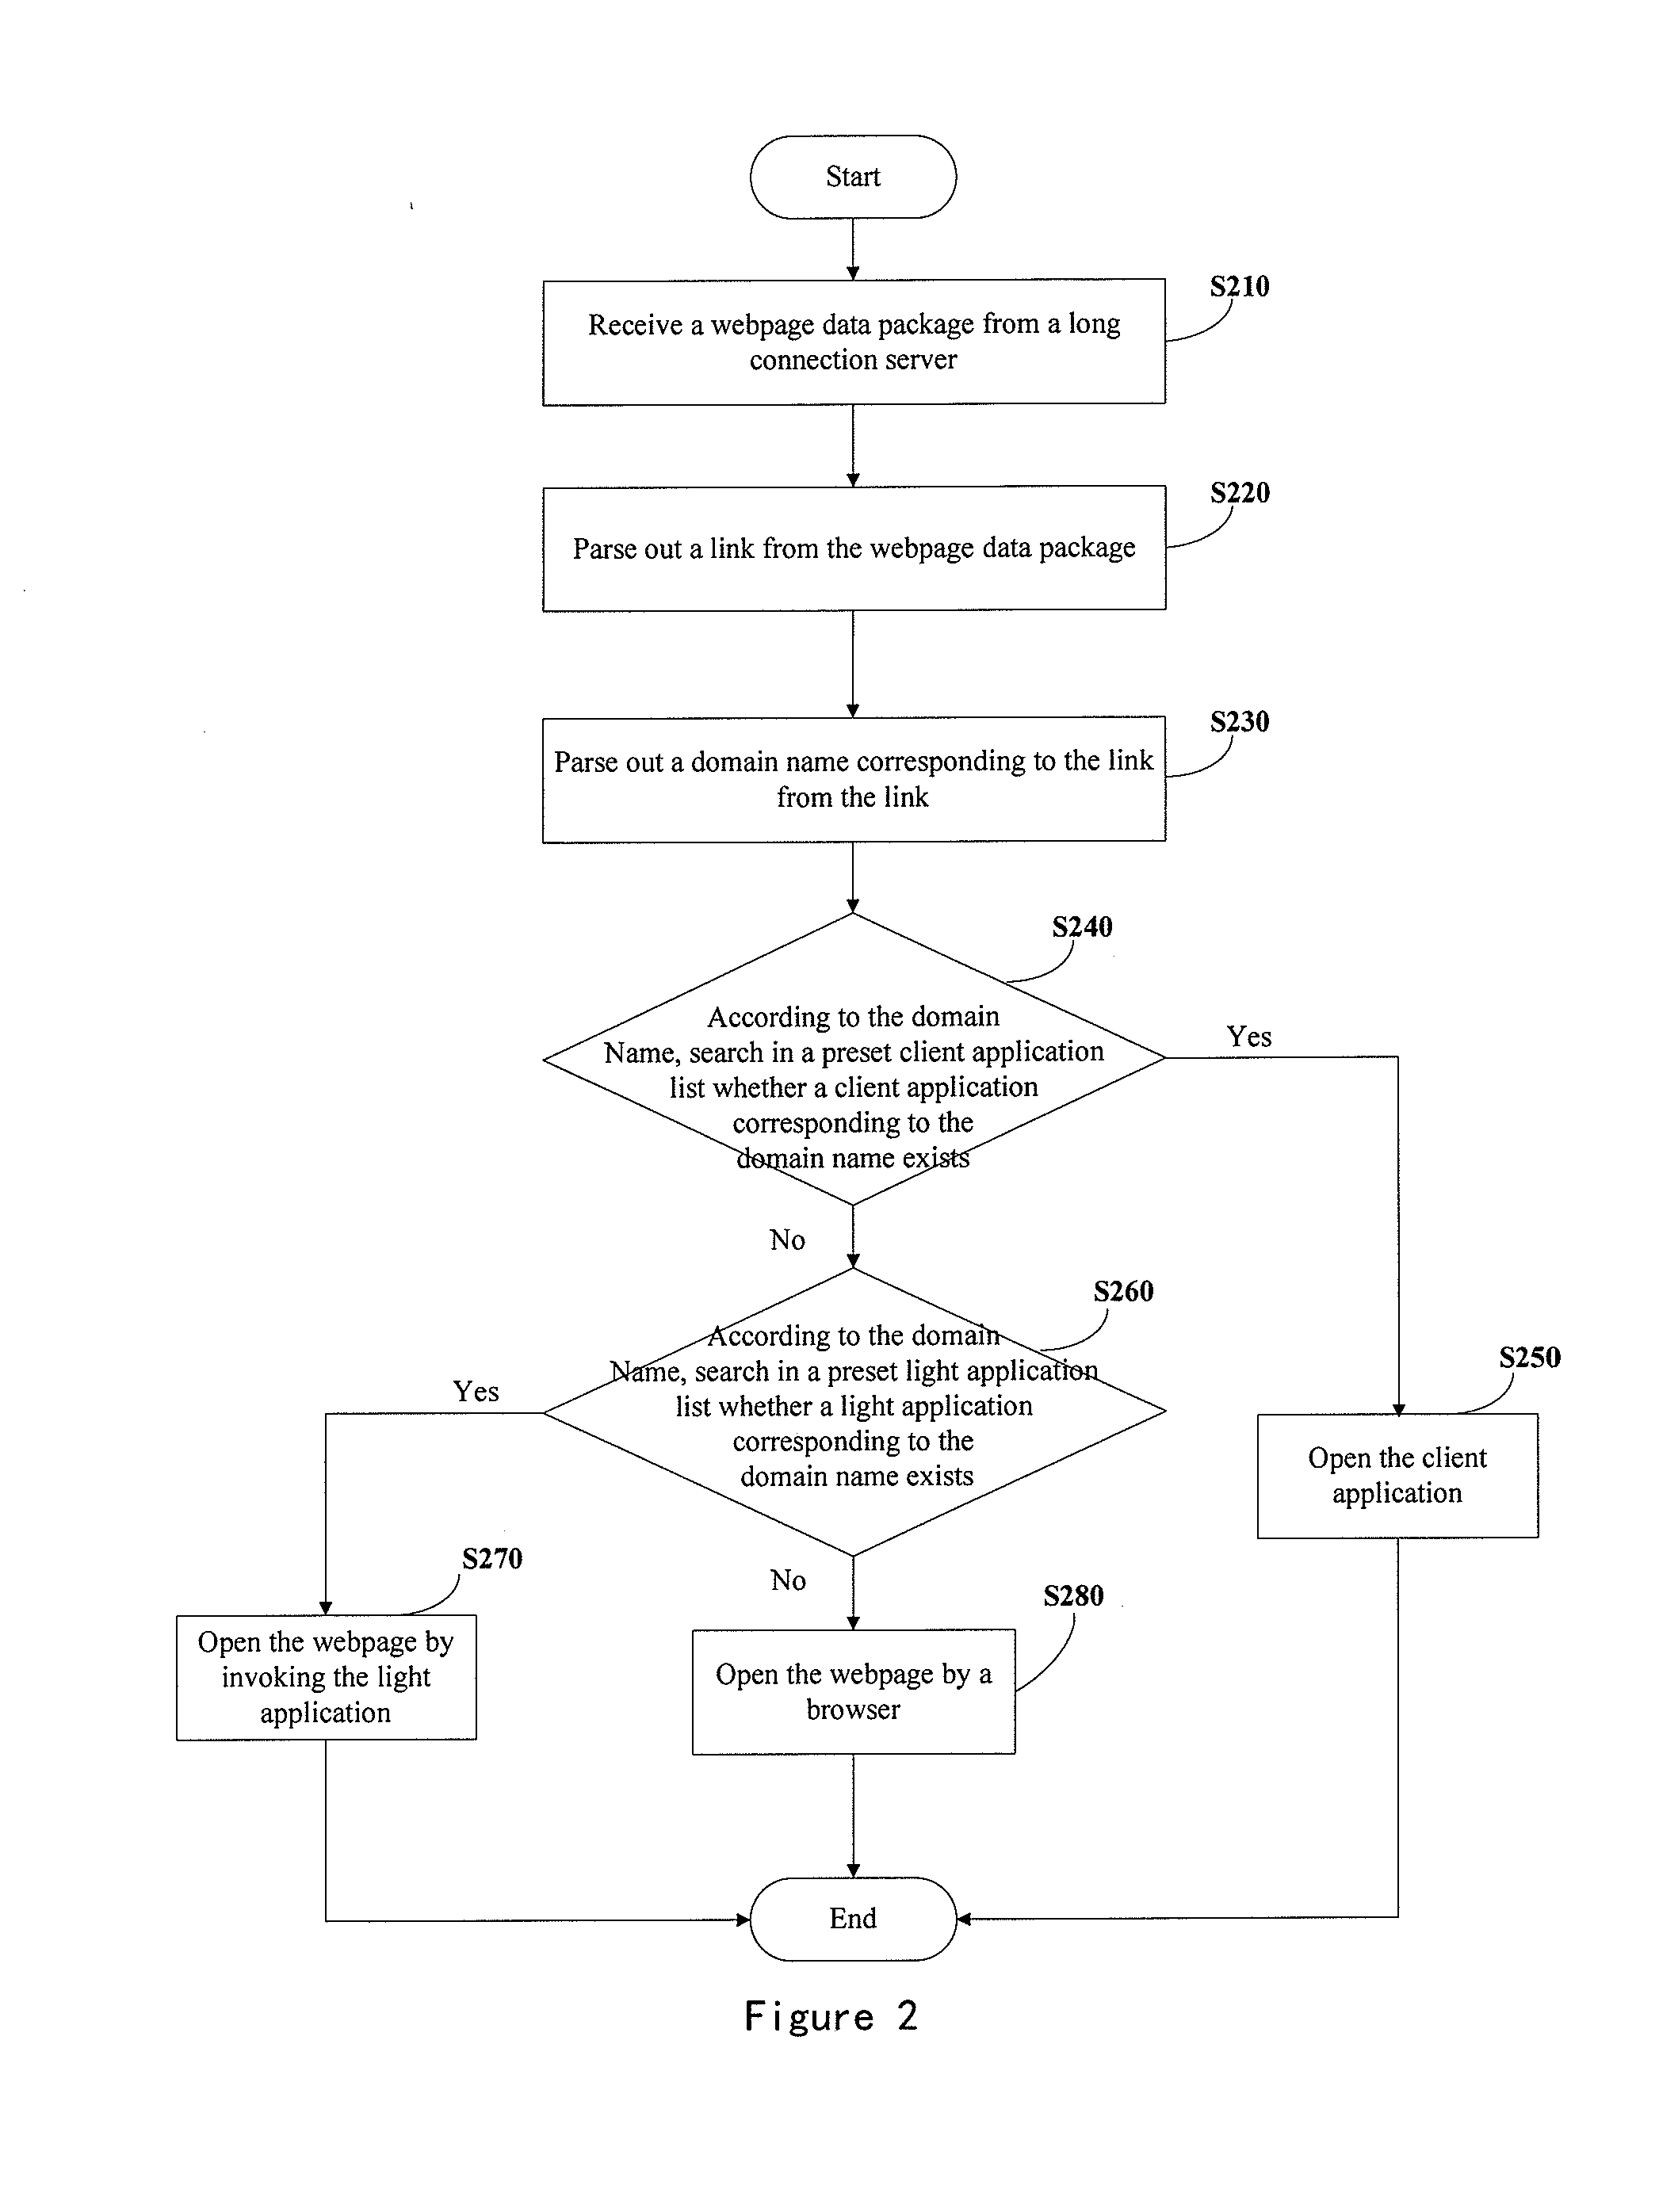 Methods and apparatuses for opening a webpage, invoking a client, and creating a light application